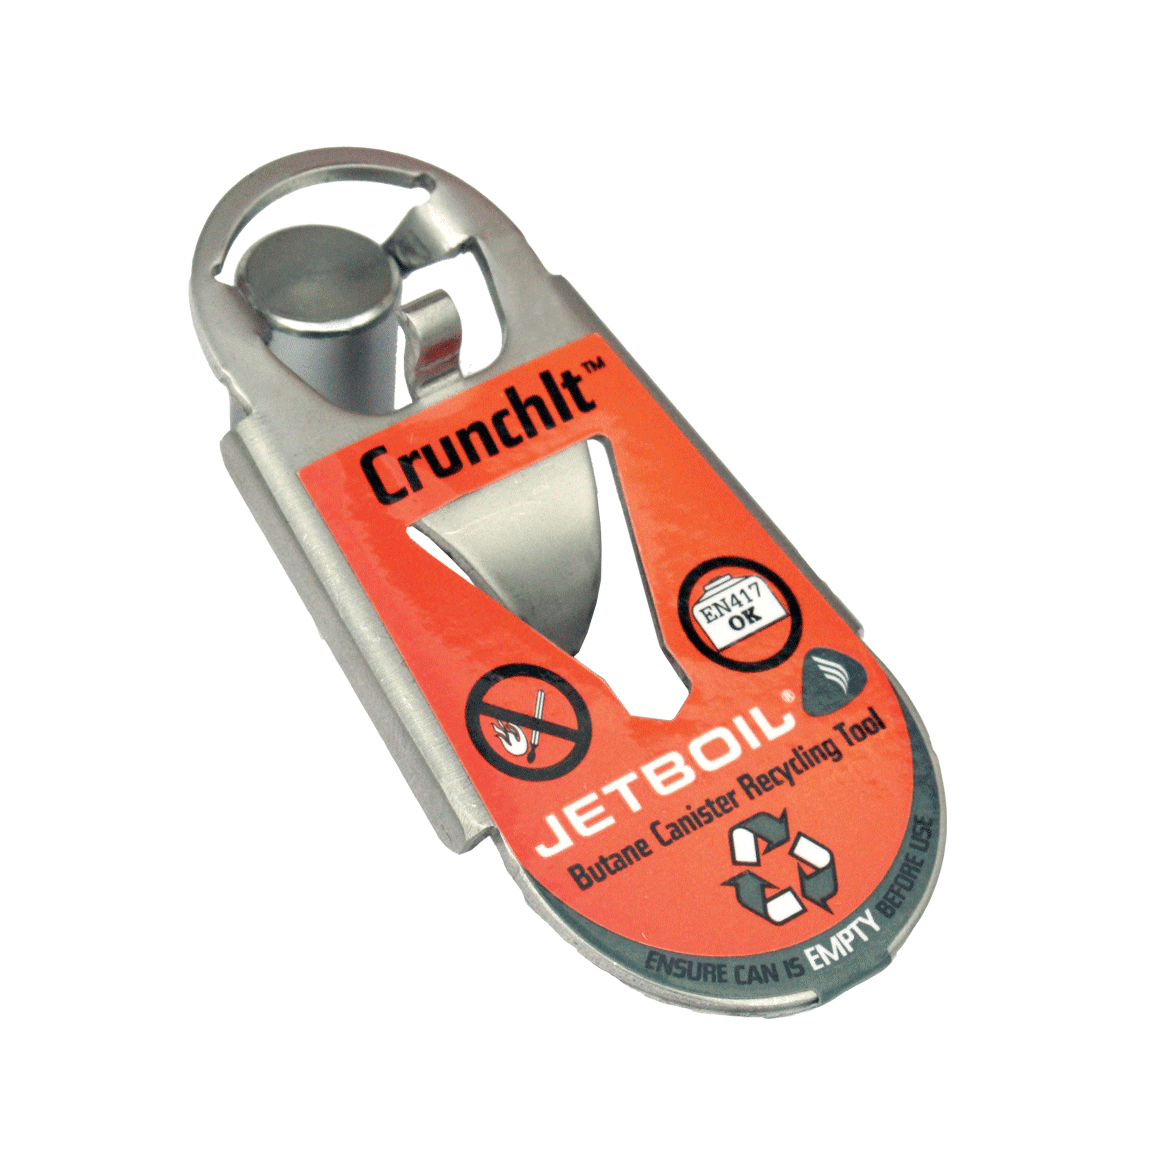 Jetboil Crunchit Canister Recycling Tool - Tramping Food and Accessories sold by Venture Outdoors NZ